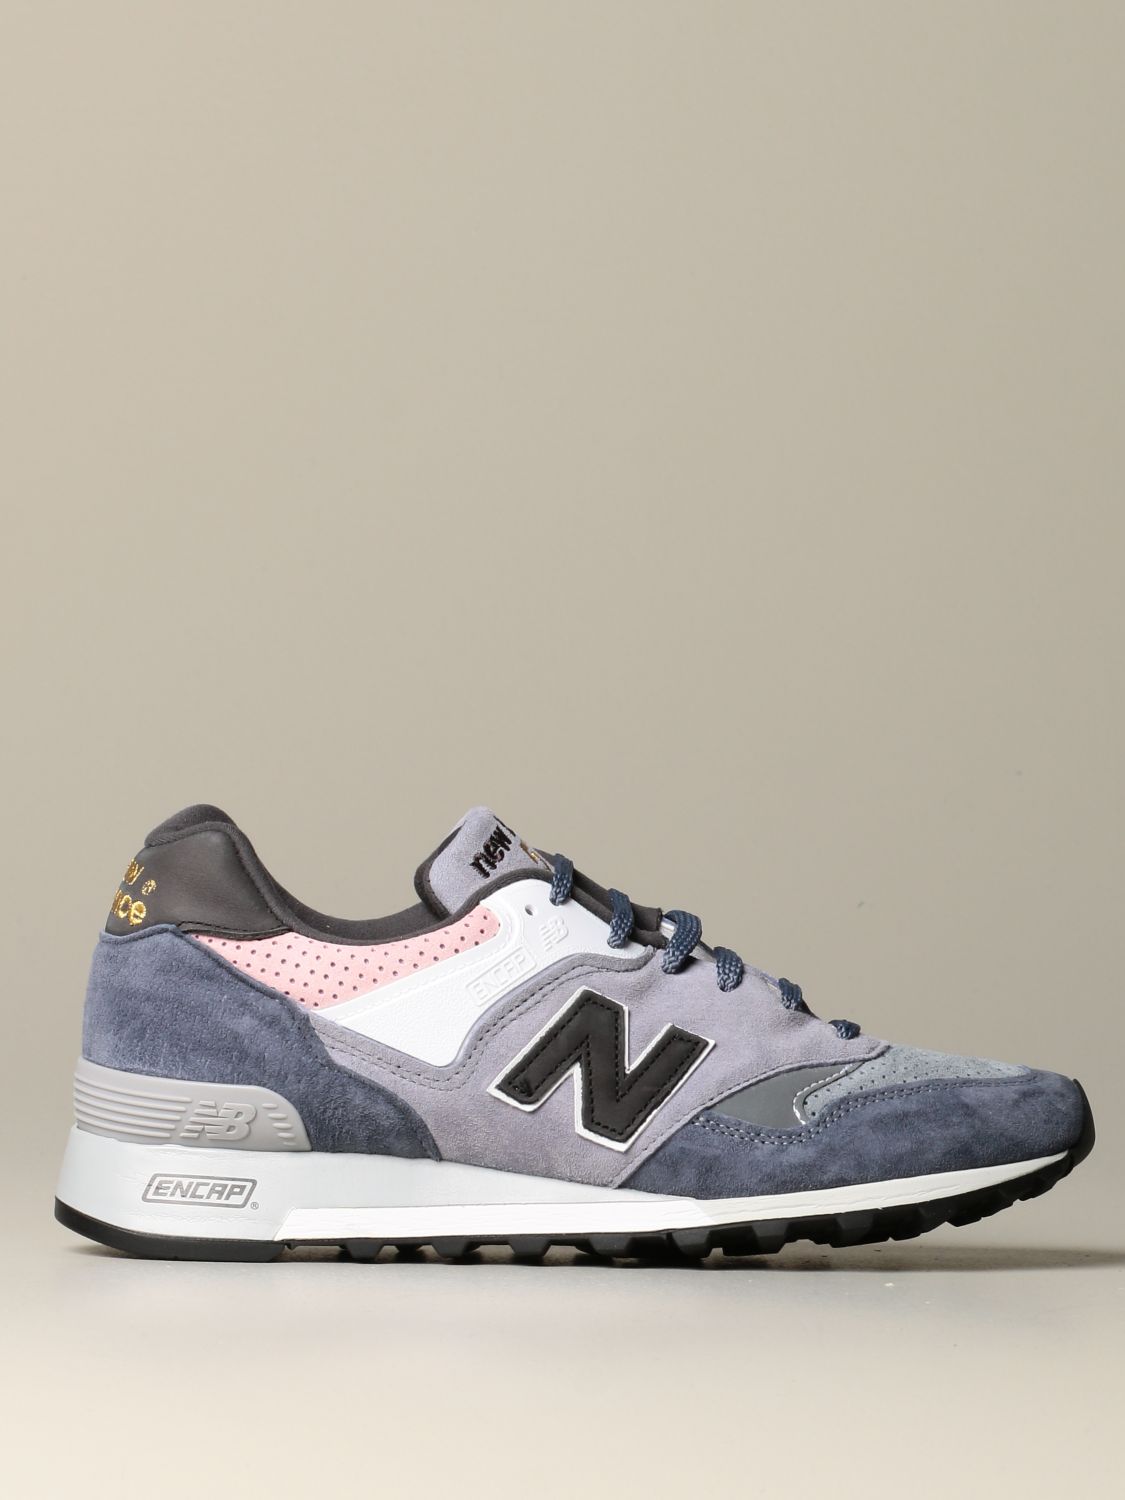 NEW BALANCE: 577 Sneakers Made in UK | Sneakers New Balance Men ...